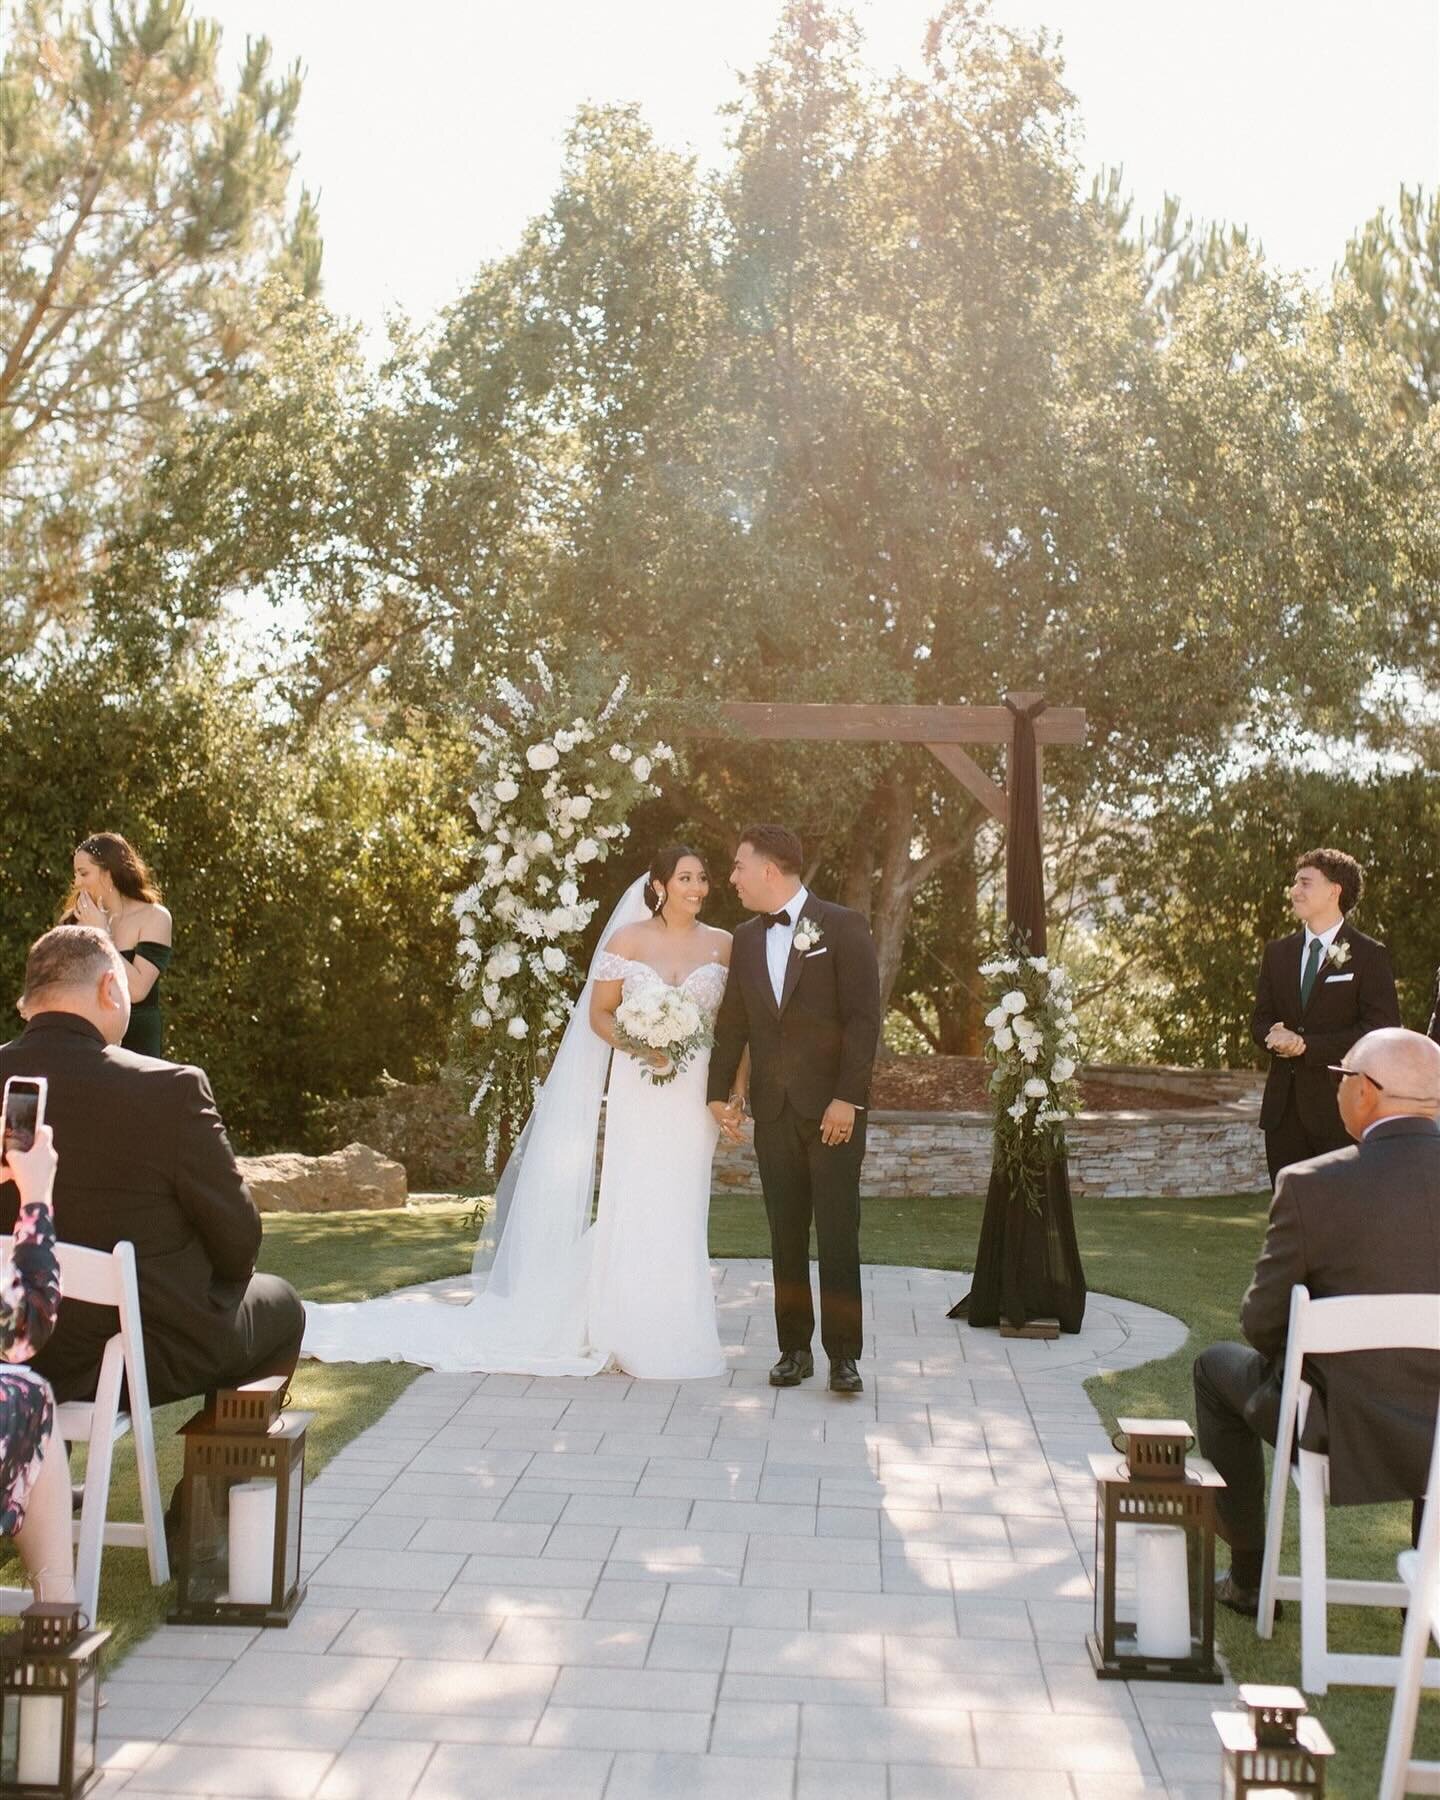 I loved loved loved this day. The gorgeous florals by @rflowersandbaskets &amp; the grounds at @weddingsatclublosmeganos made for a picturesque backdrop during the ceremony. Not only were the aesthetics beautiful, but Jose + Klarissa&rsquo;s love mad